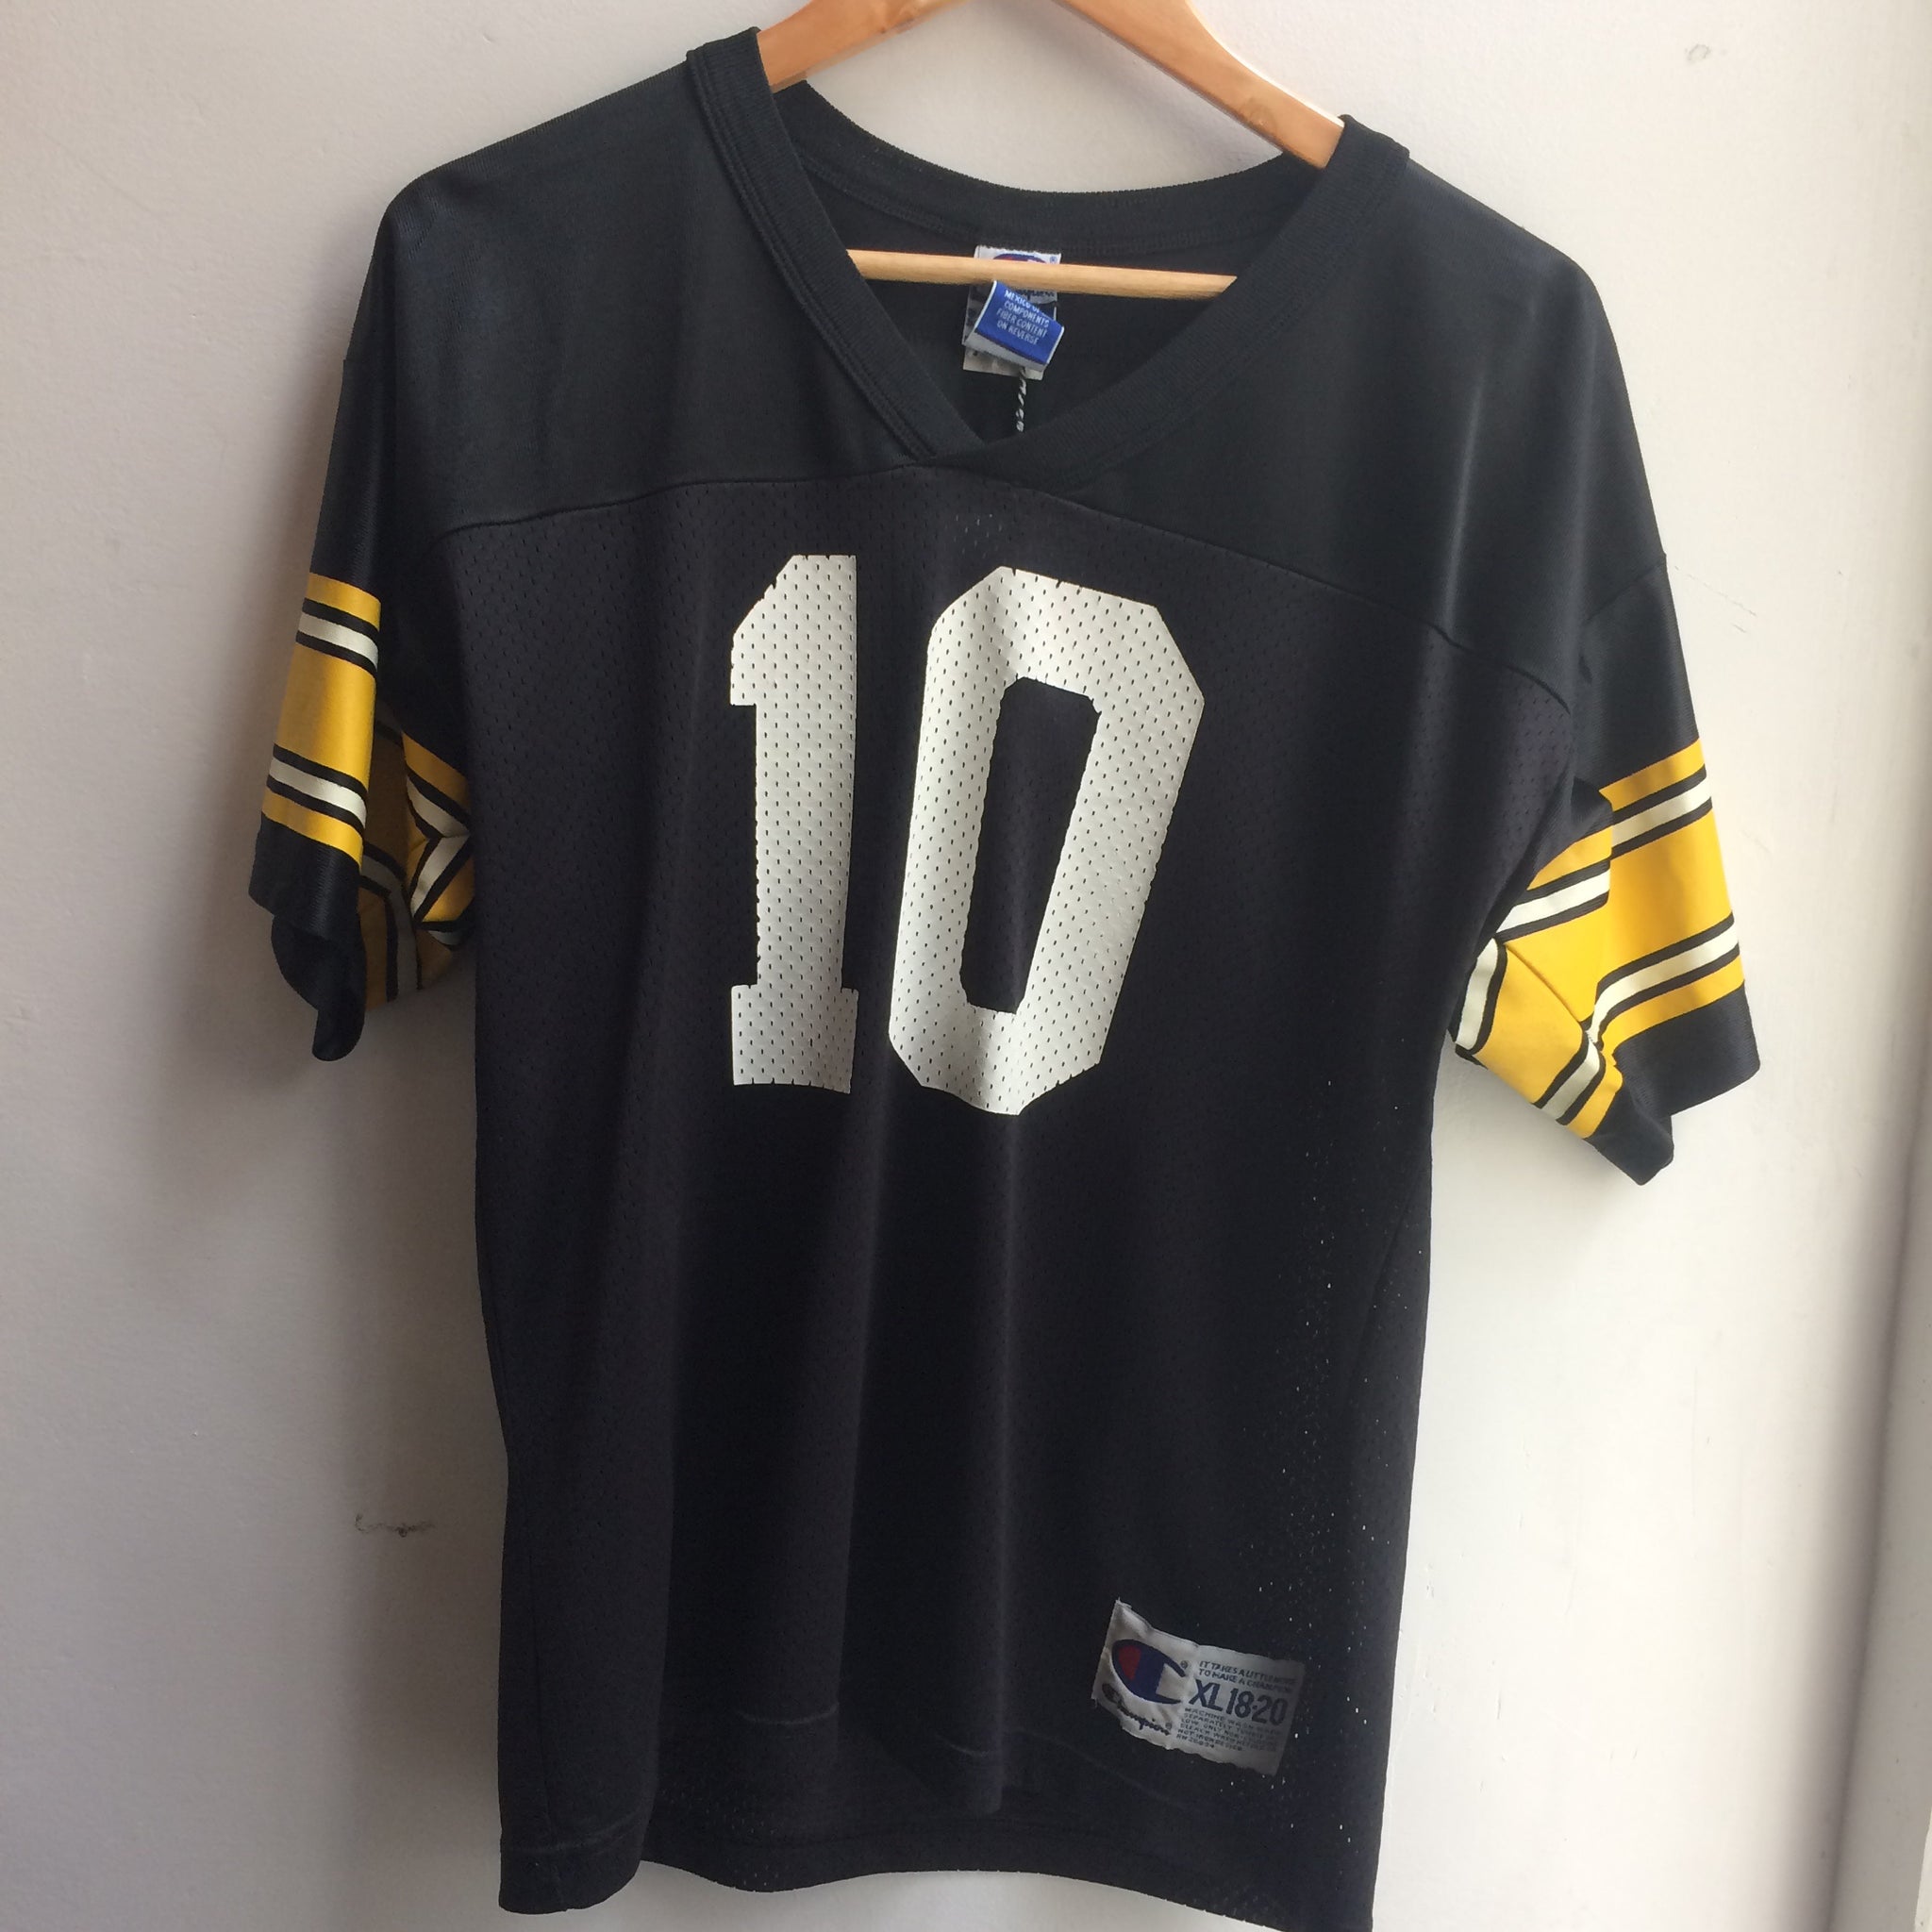 what steelers jersey should i get